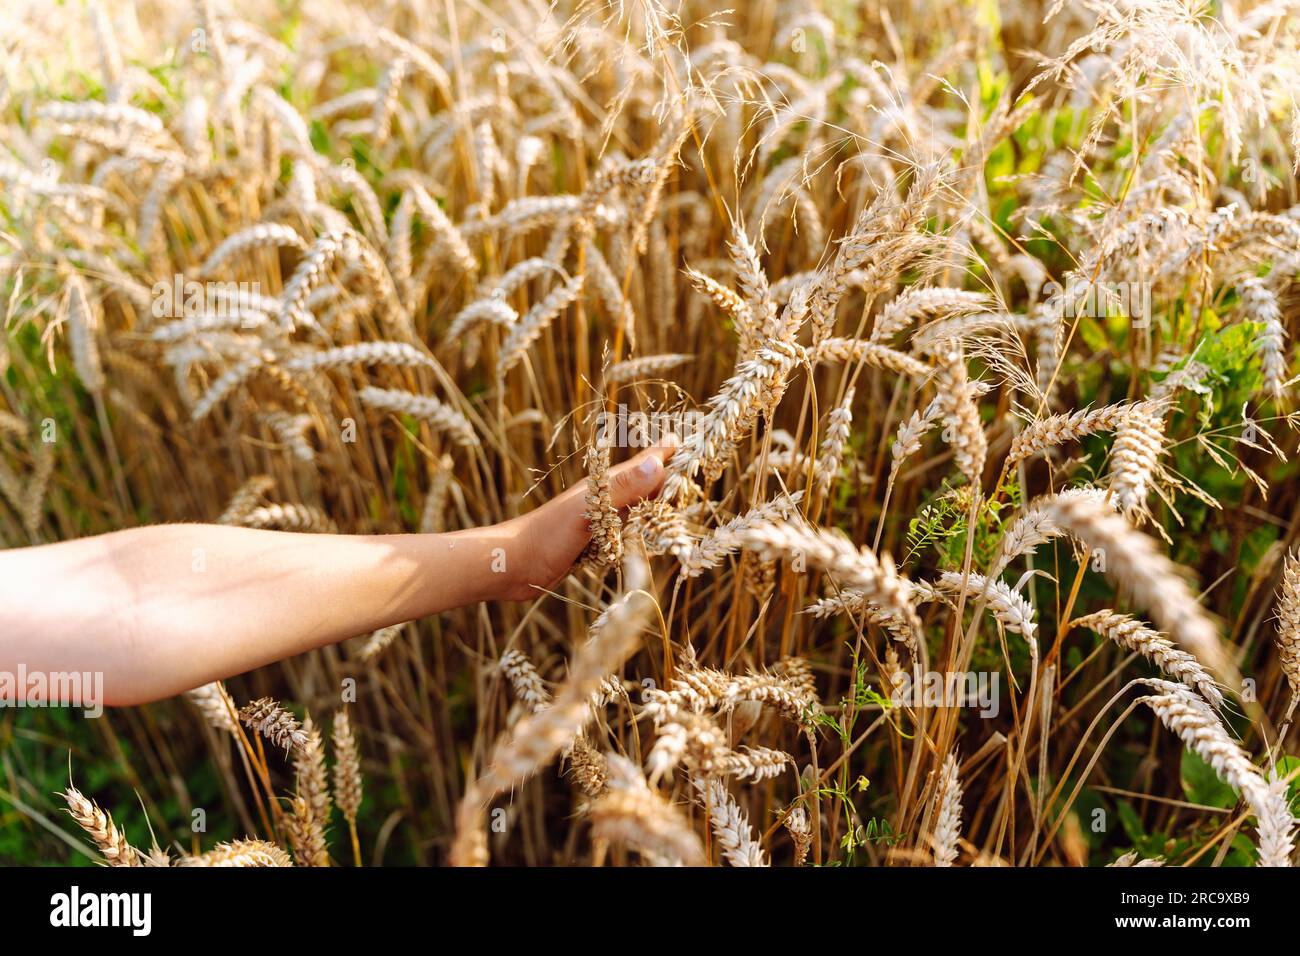 A child's hand touches ripe ears of wheat in a grain field. Stock Photo